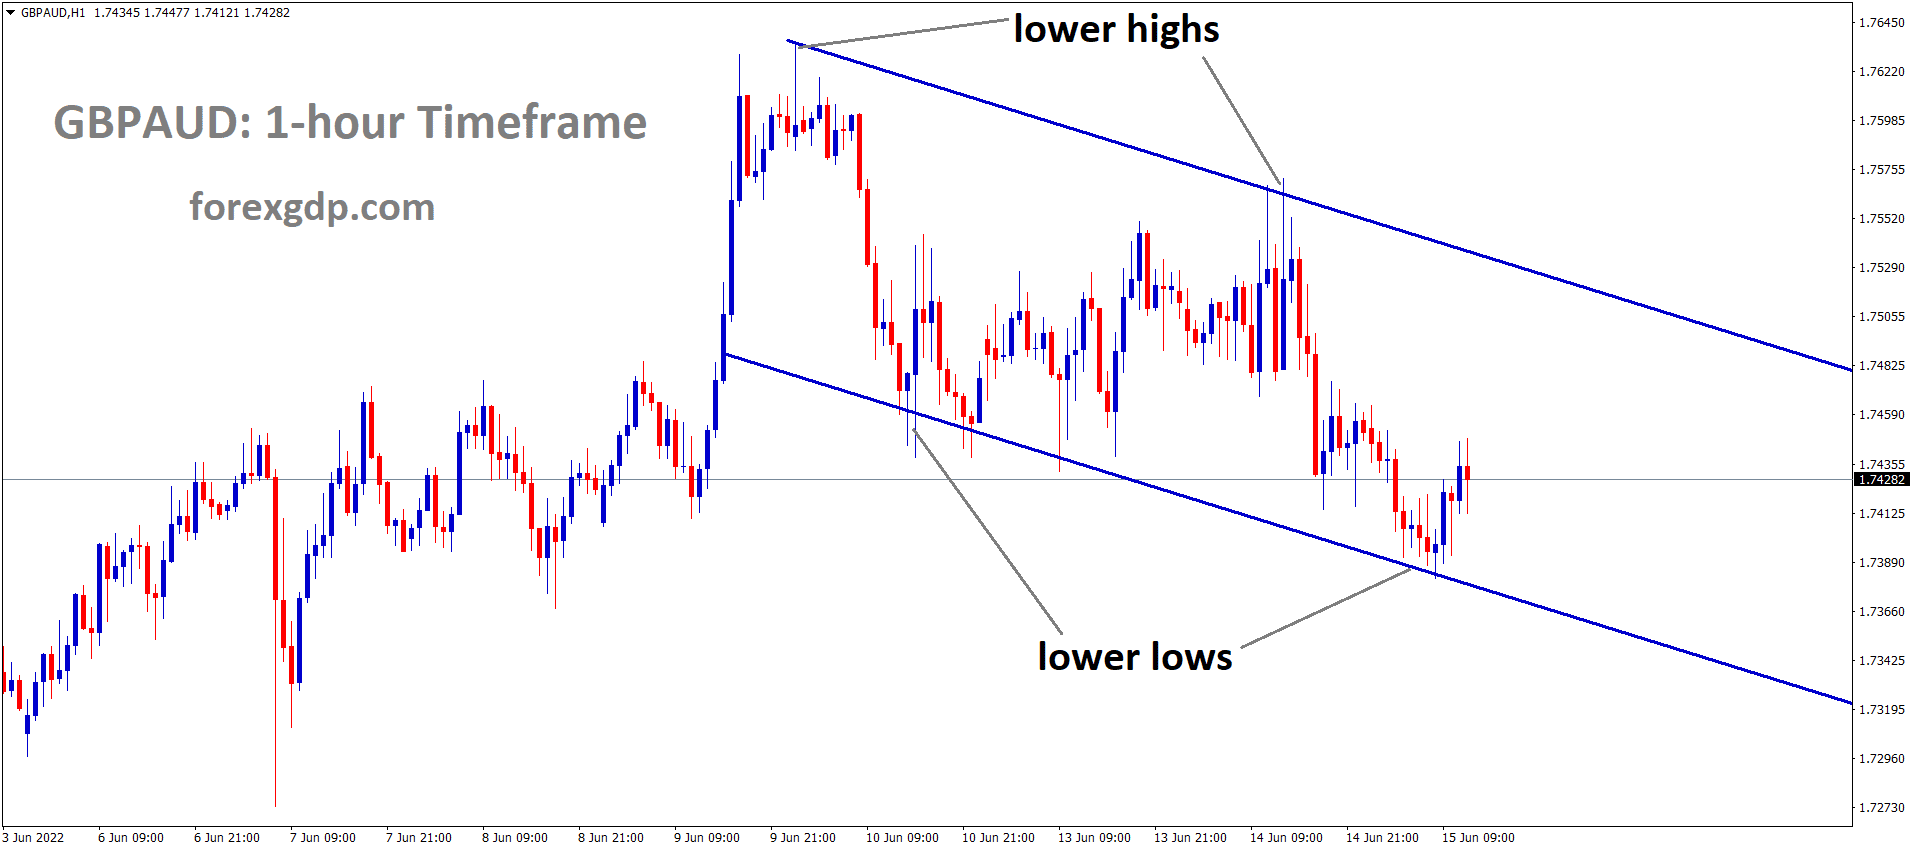 GBPAUD is moving in the Descending channel and the Market has rebounded from the Lower low area of the channel